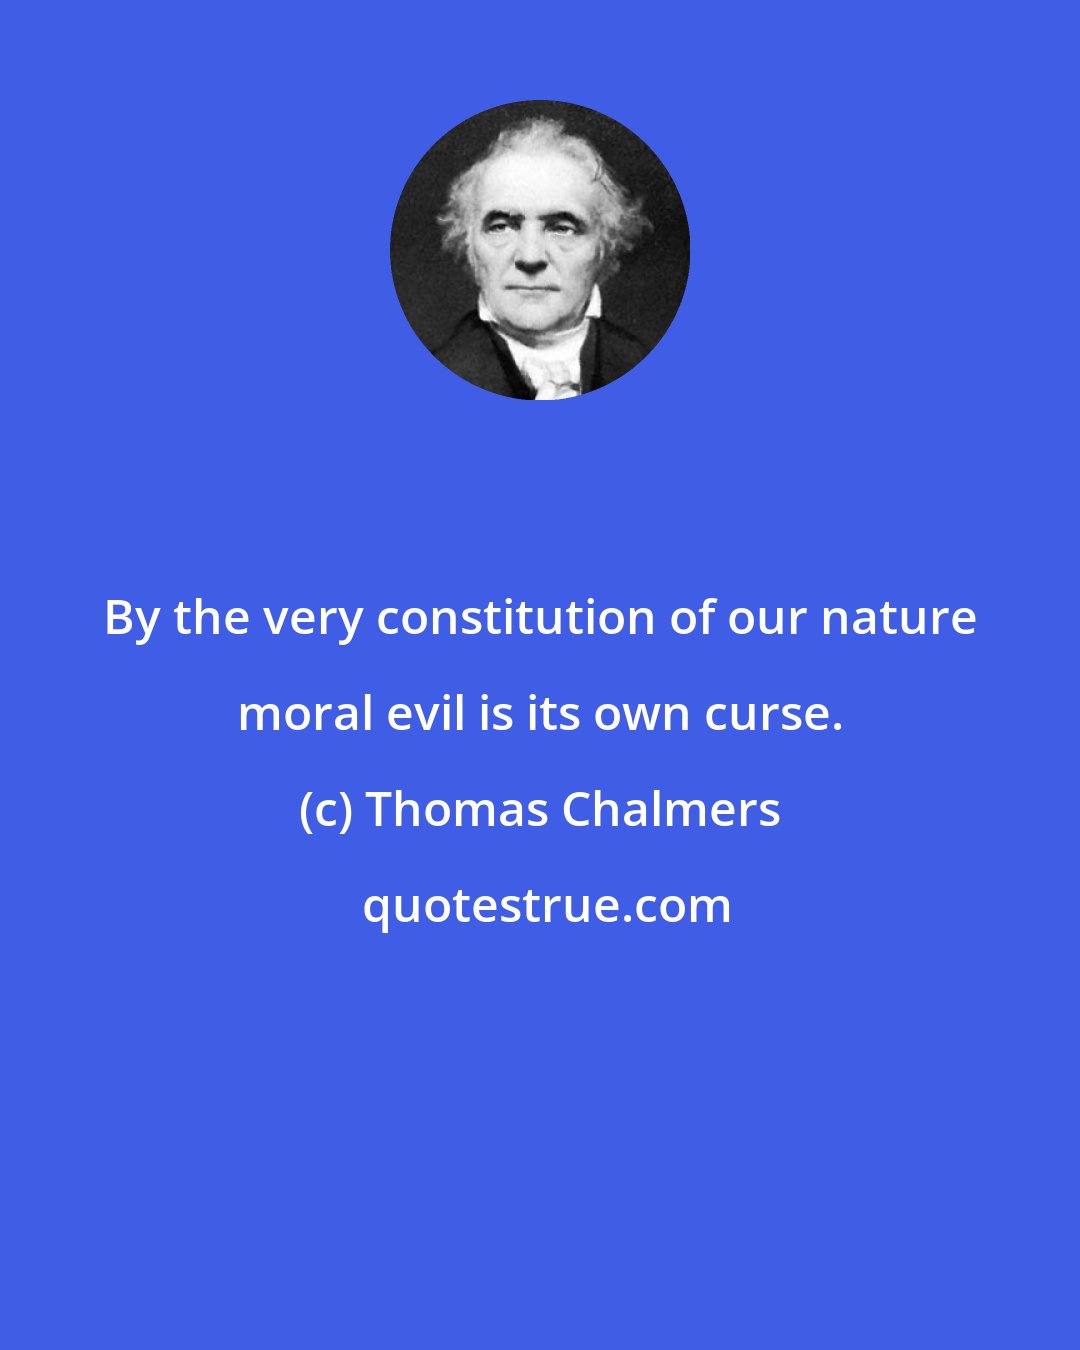 Thomas Chalmers: By the very constitution of our nature moral evil is its own curse.